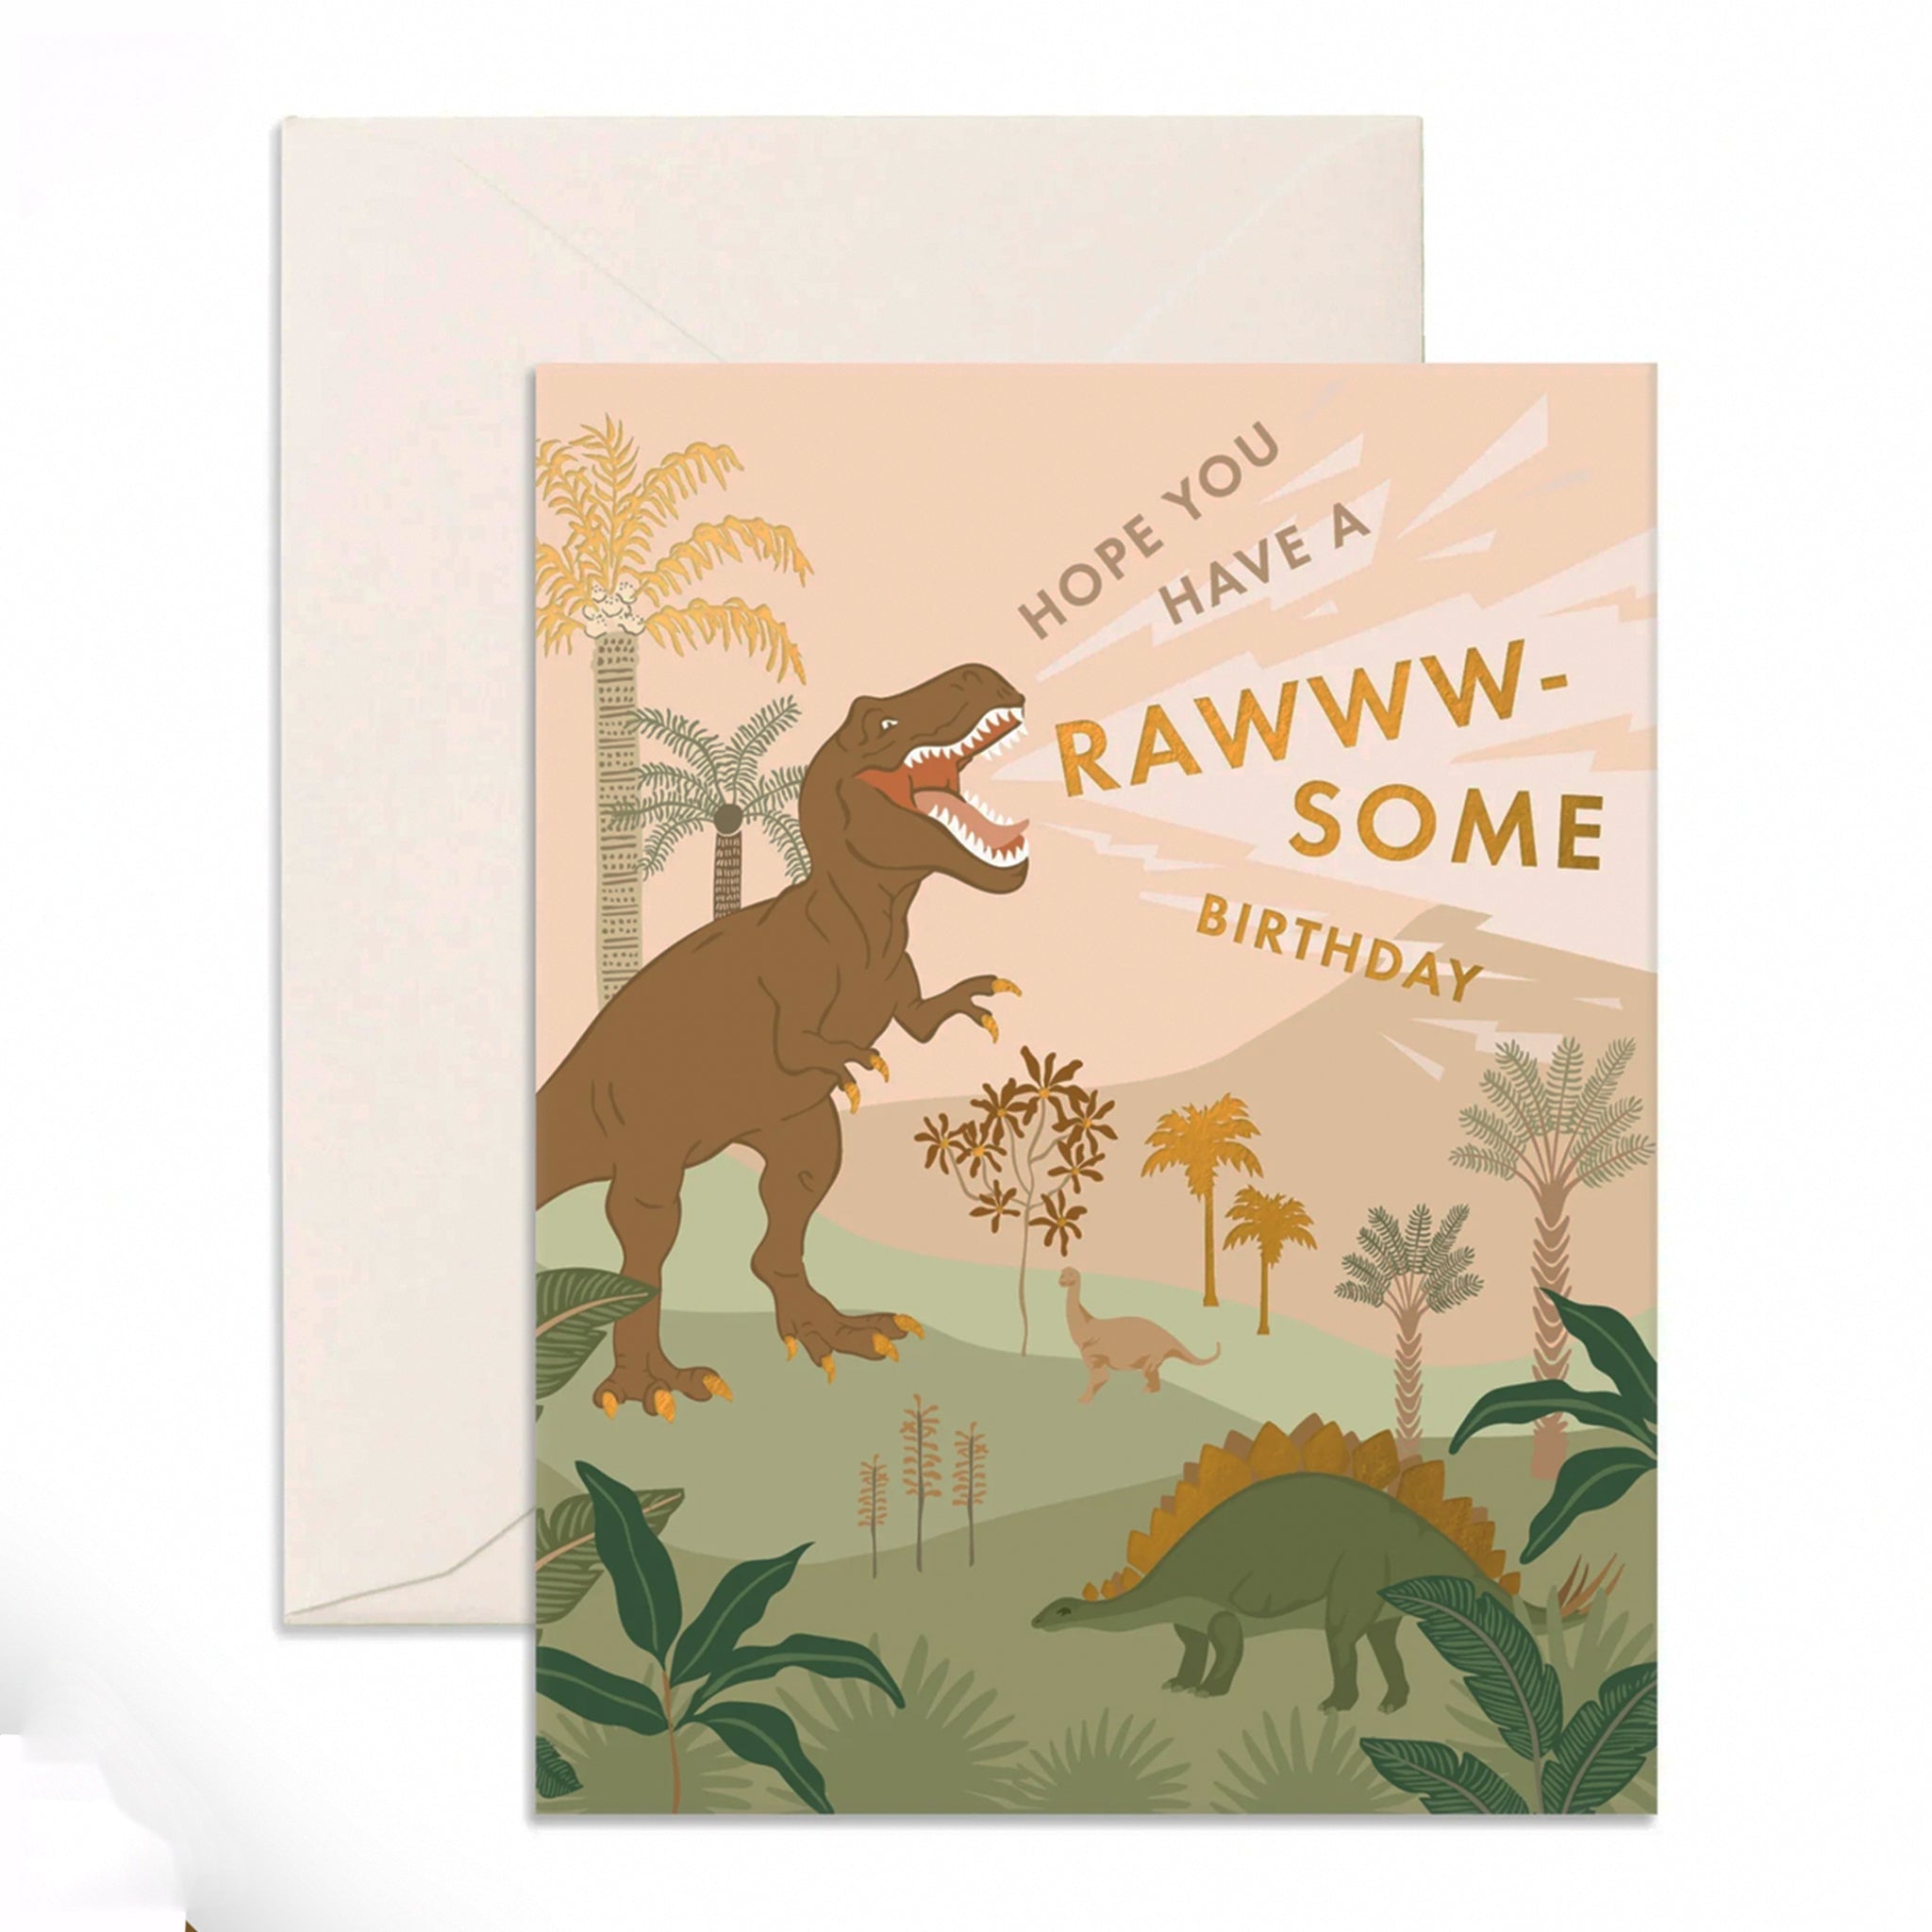 On a white background is a birthday card with a graphic of dinosaurs in a tropical landscape with gold foiled text that reads, &quot;Hope You Have A Rawww-Some Birthday&quot;.